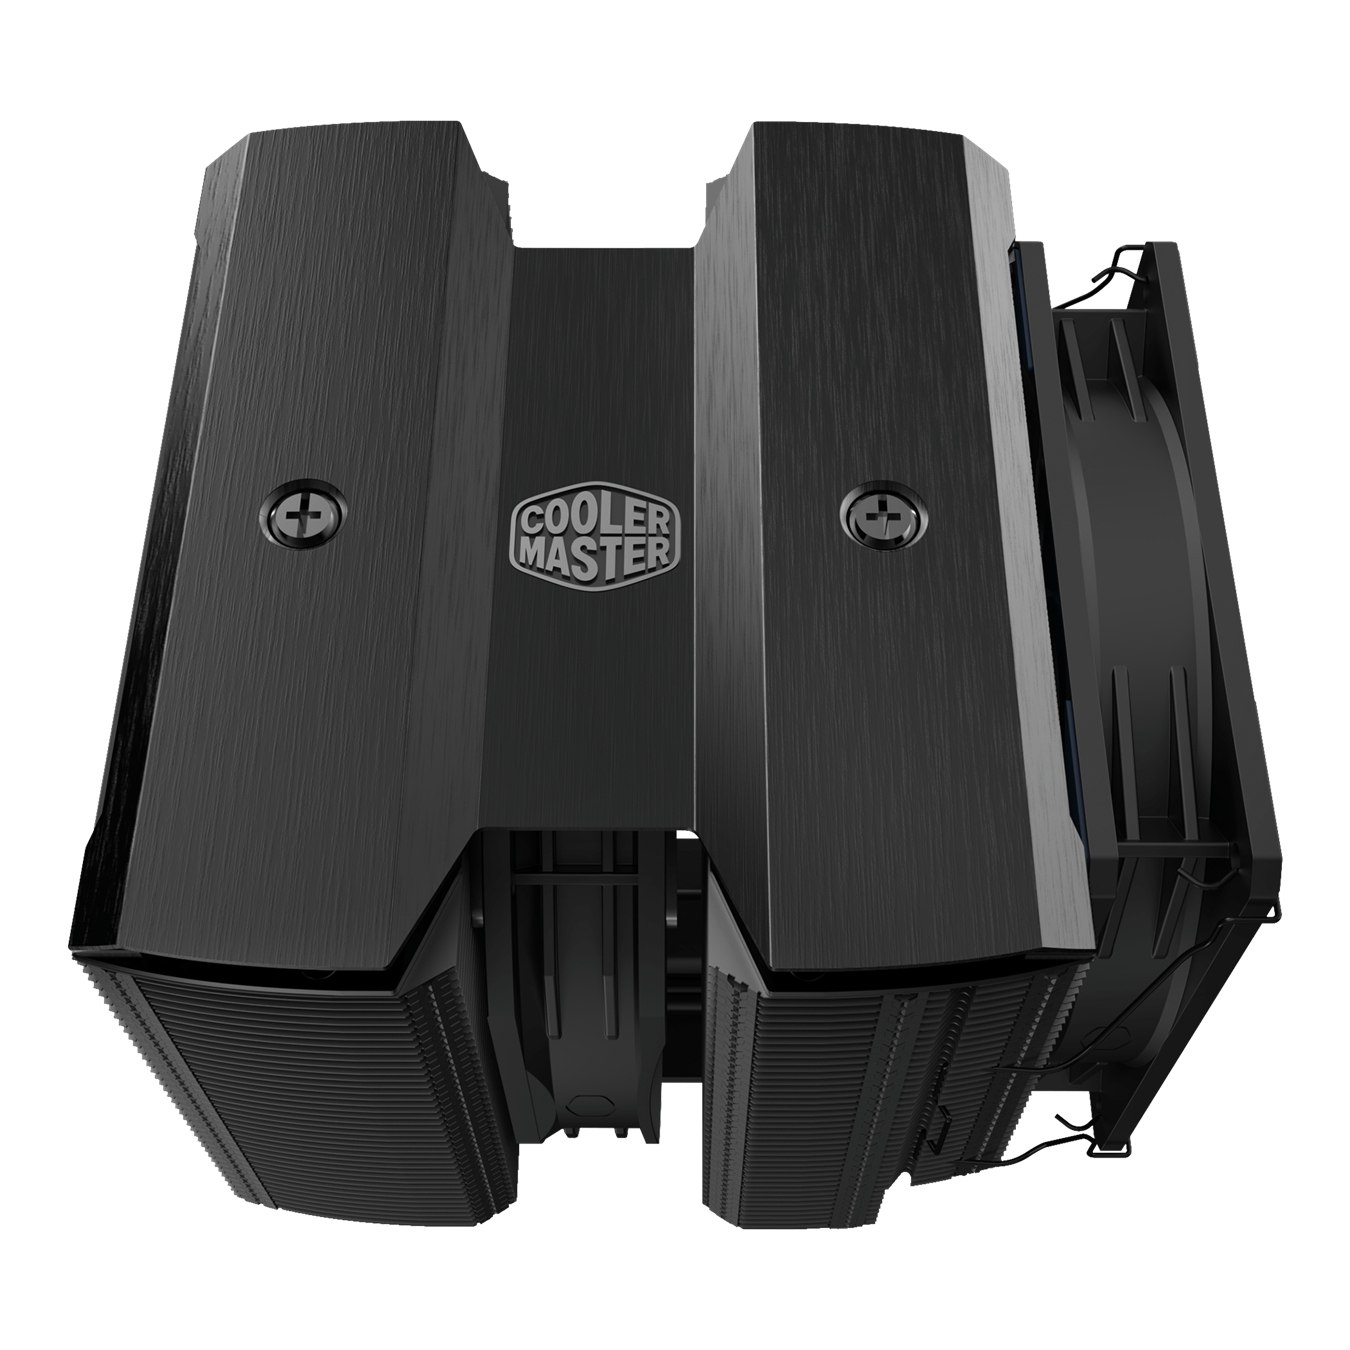 Cooler Master MA824 Stealth | 120mm Tower Air Cooler